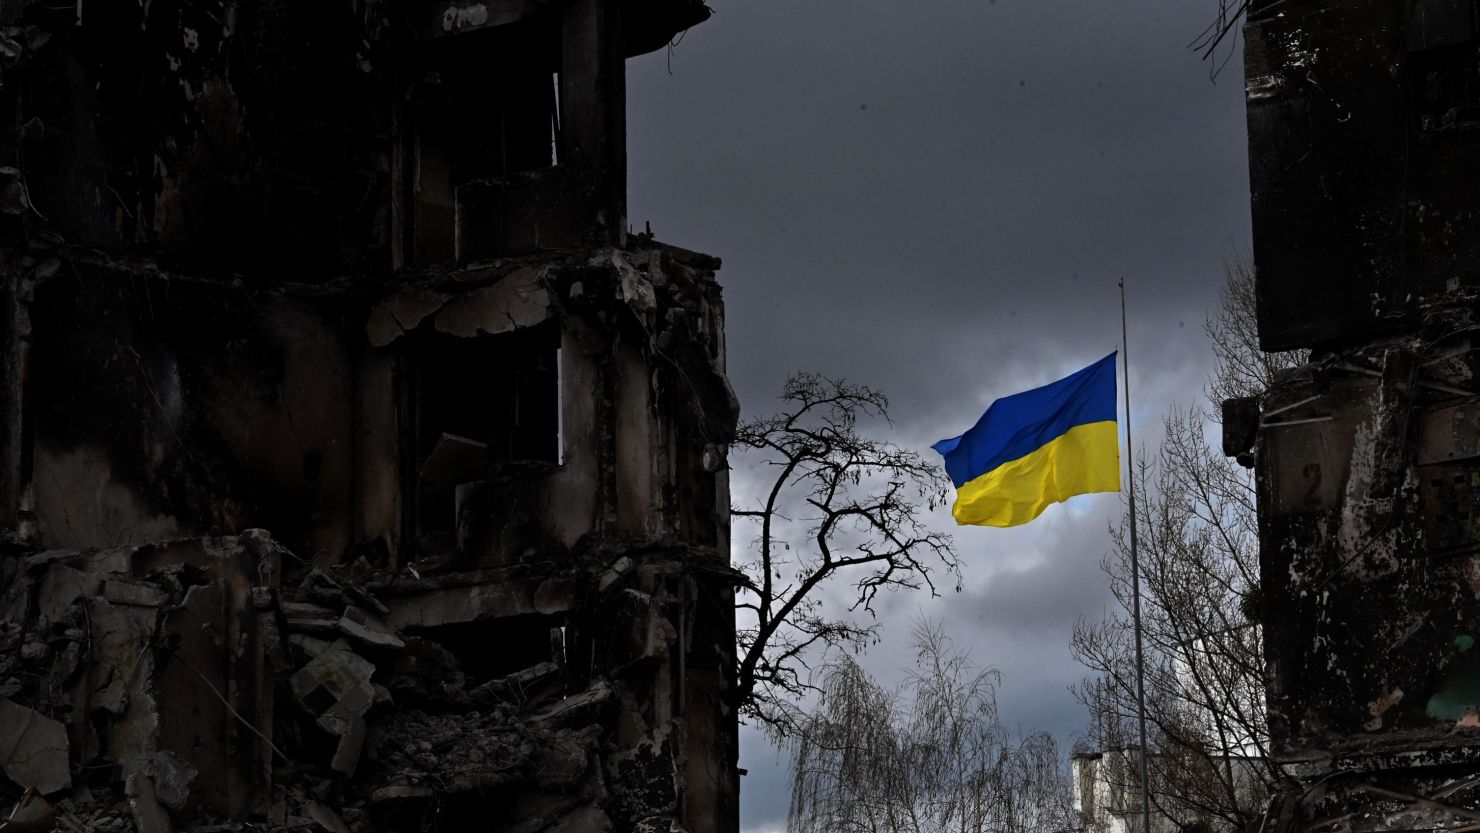 TOPSHOT - The Ukrainian flag flutters between buildings destroyed in bombardment, in the Ukrainian town of Borodianka, in the Kyiv region on April 17, 2022. - Russia invaded Ukraine on February 24, 2022. (Photo by Sergei SUPINSKY / AFP) (Photo by SERGEI SUPINSKY/AFP via Getty Images)